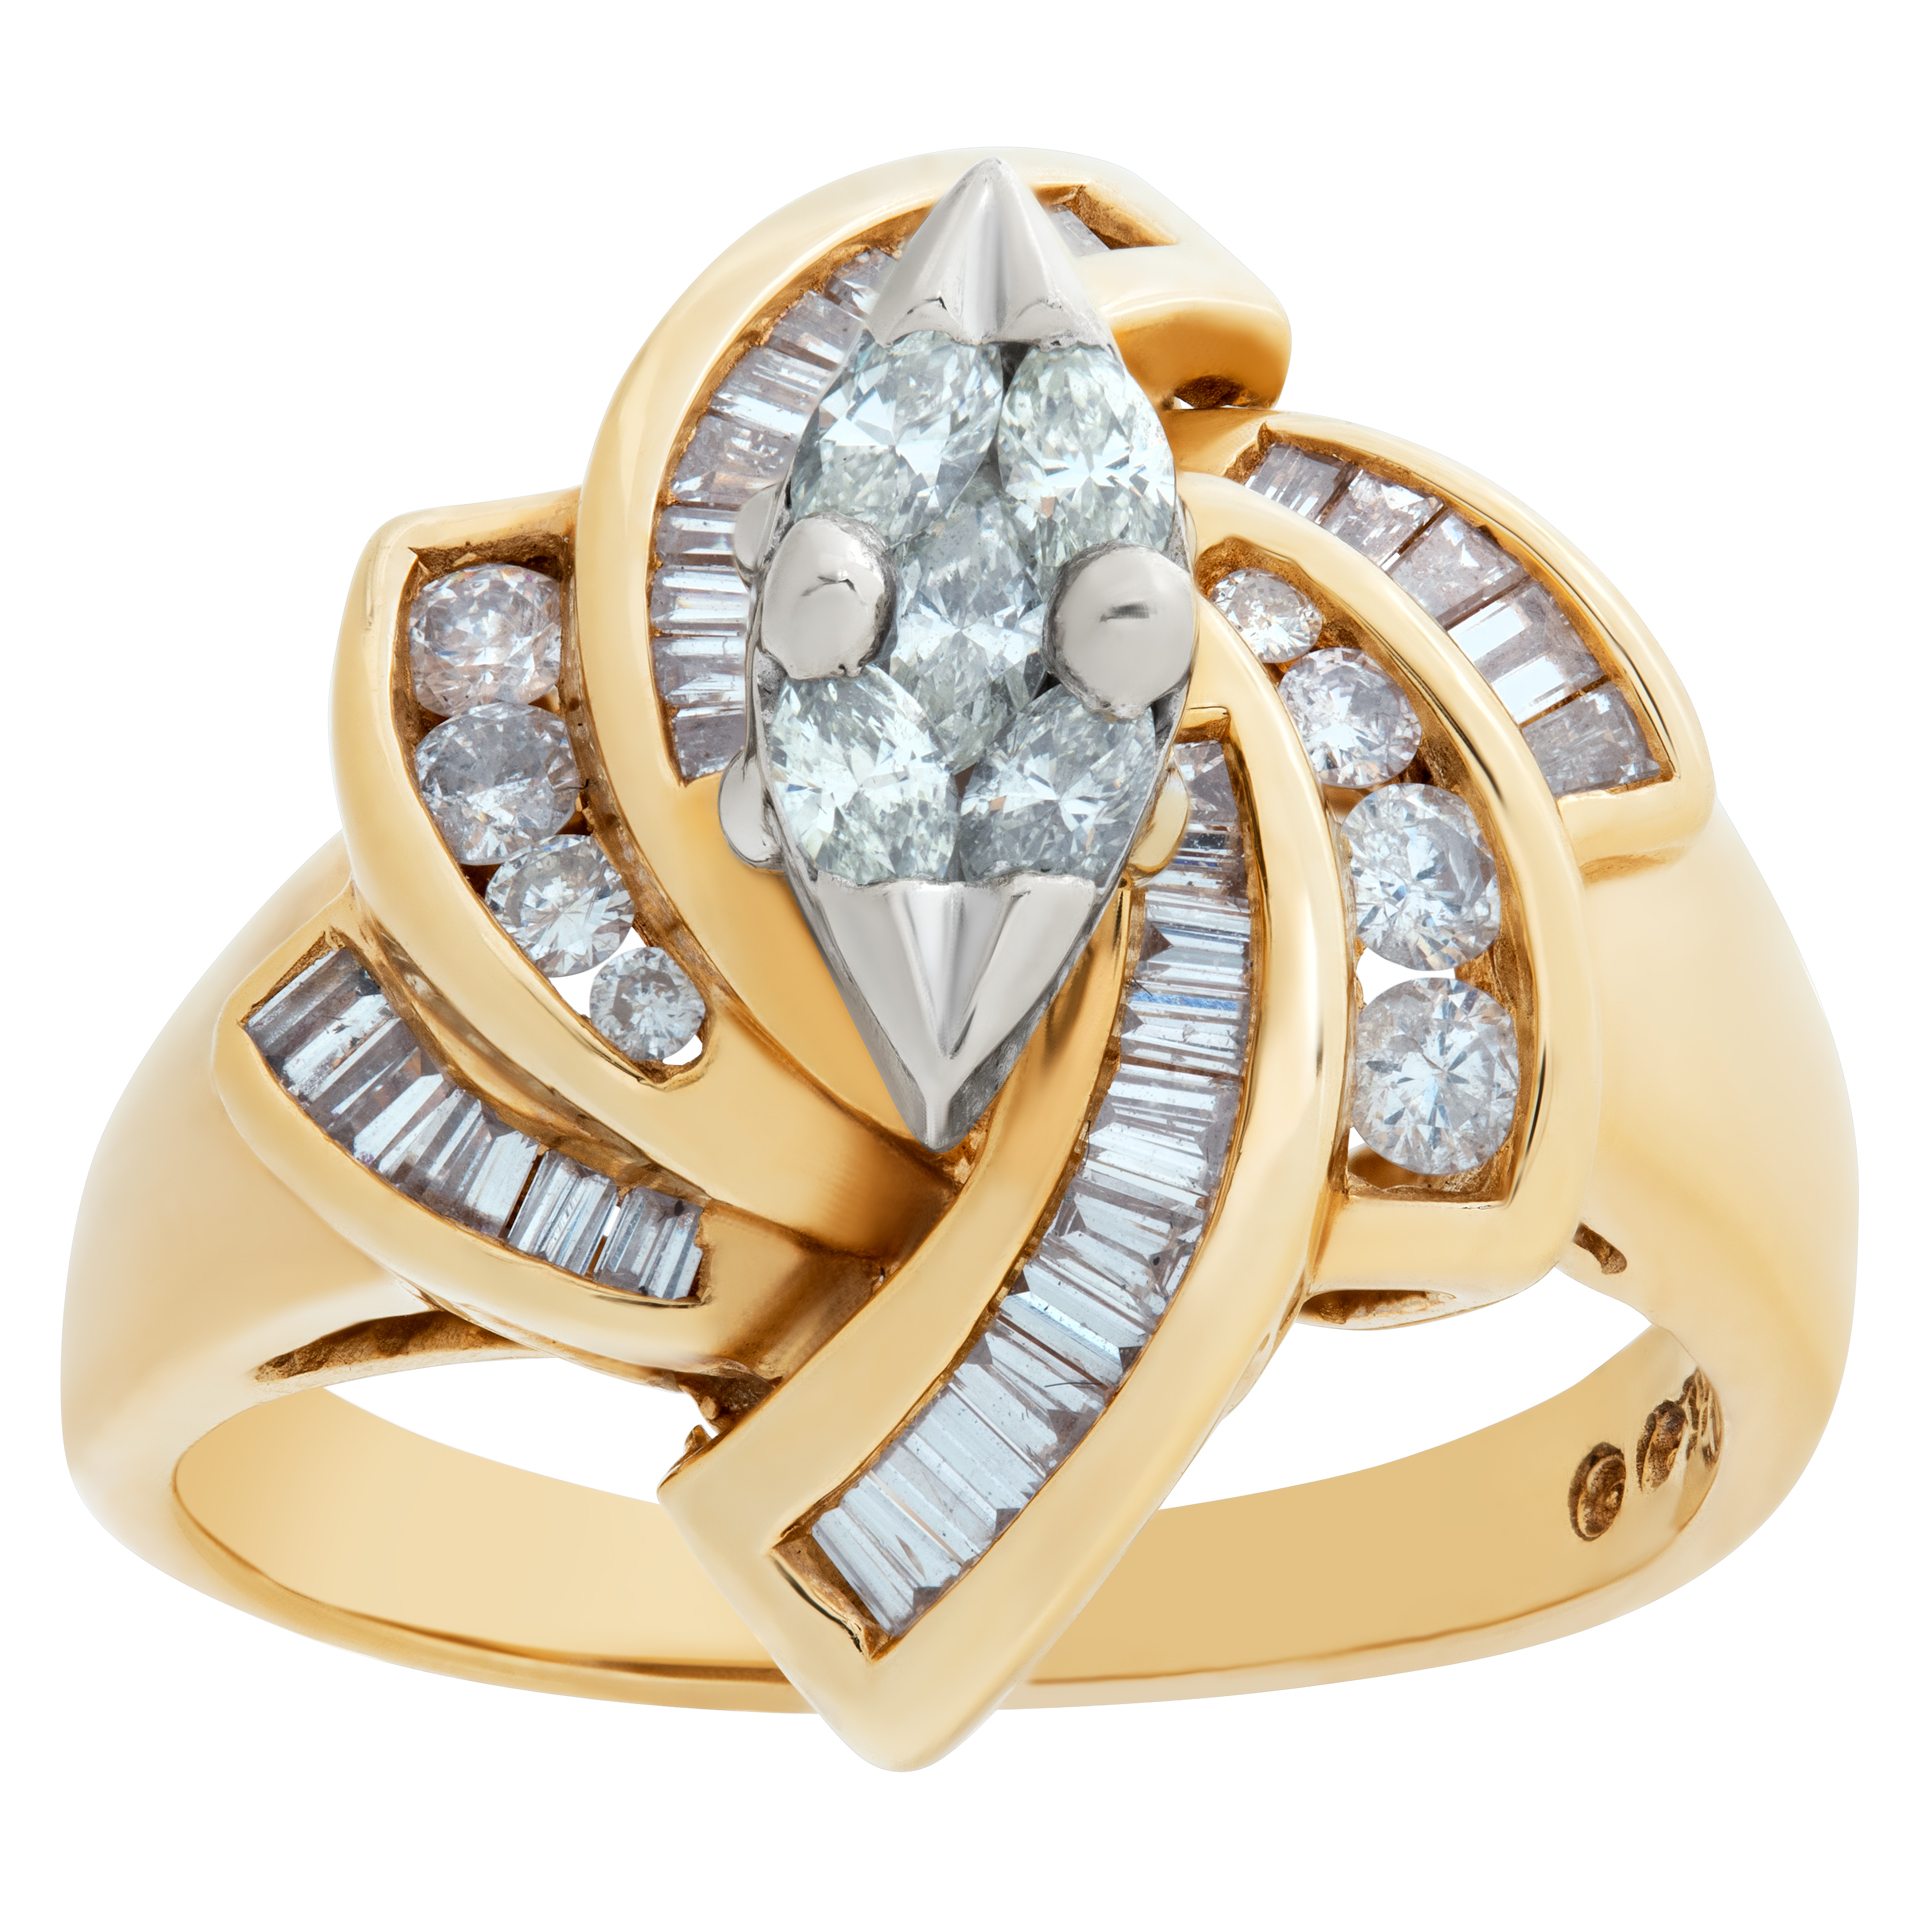 Fascinating diamond ring in 14k yellow gold. 1.50 carats in diamonds. Size 7.75